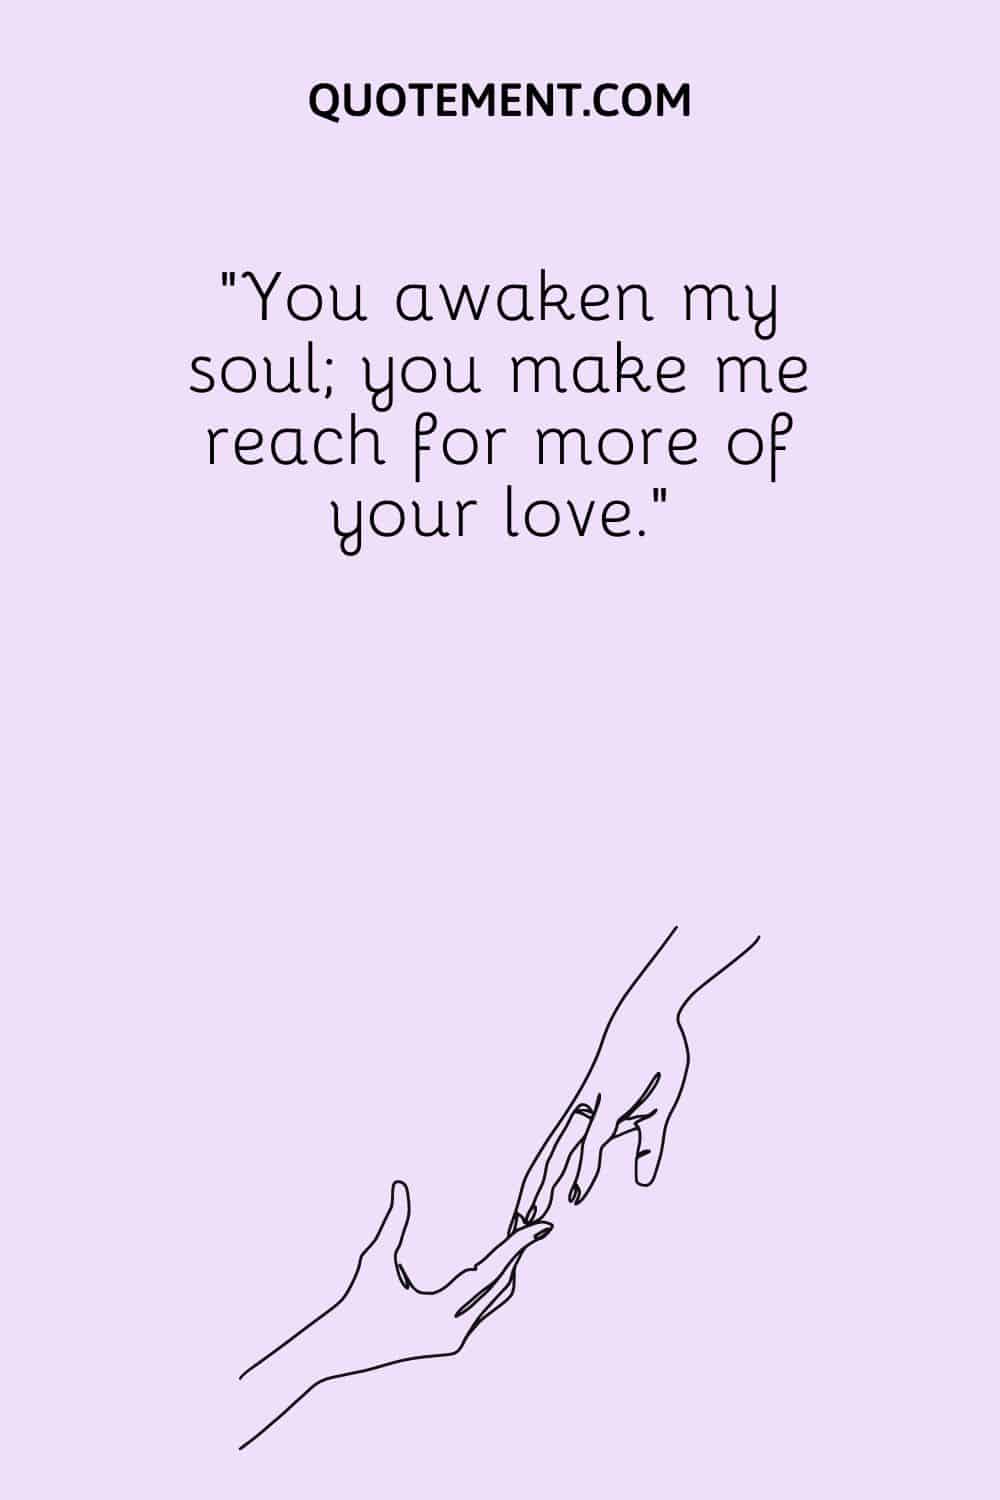 You awaken my soul; you make me reach for more of your love